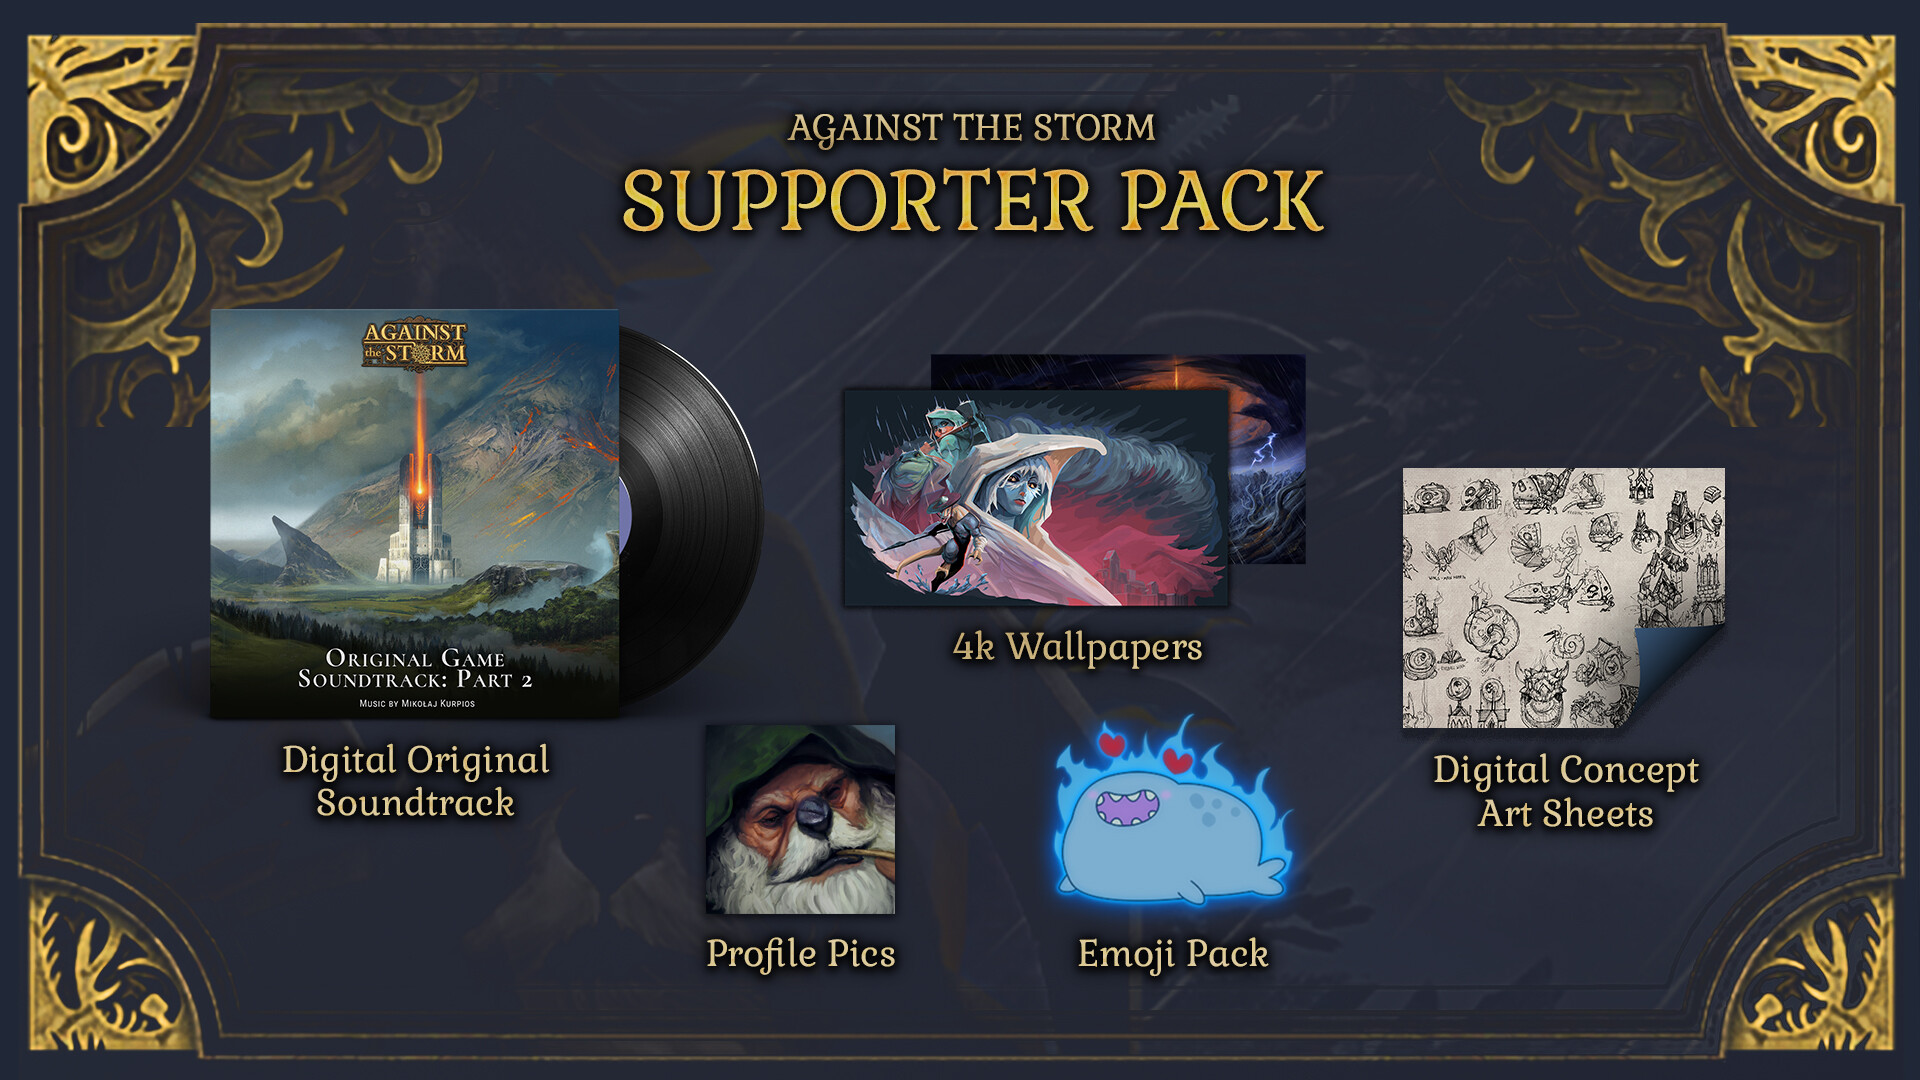 Against the Storm - Supporter Pack DLC Steam CD Key 7.74 $